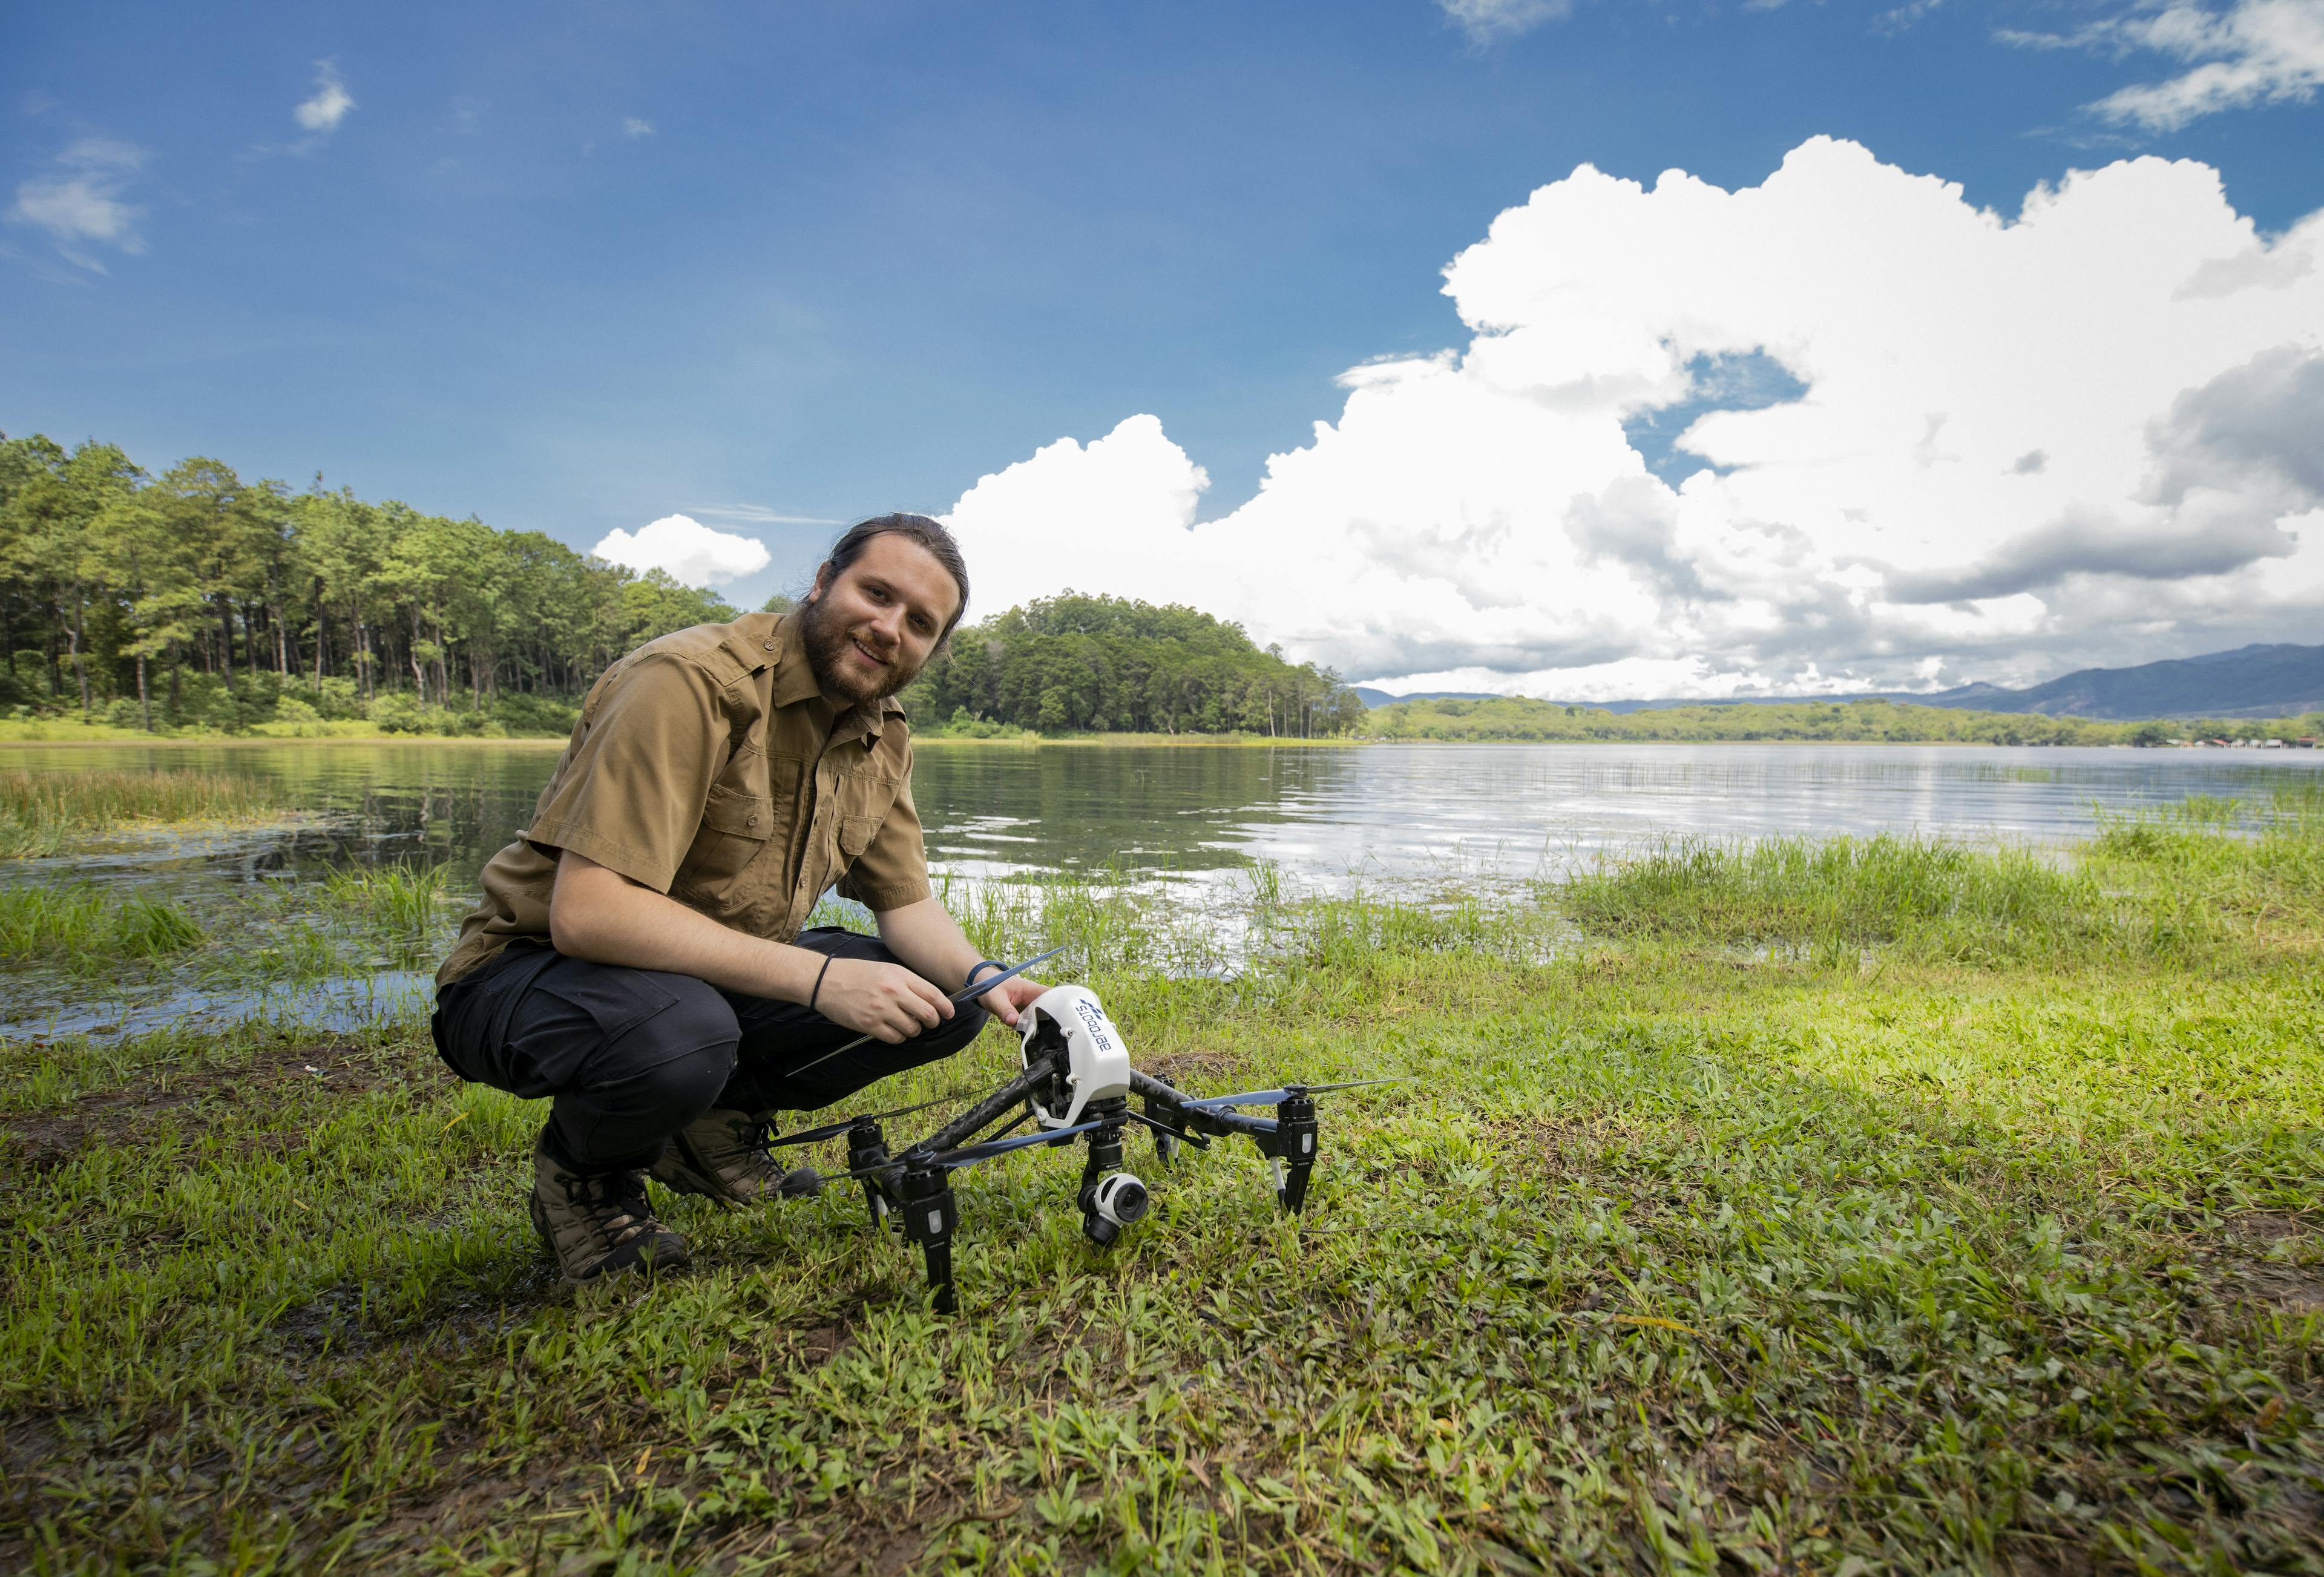 Dan Alvarez, drone engineer from the company Aerobots in Guatemala and team member of the UNICEF-led Dronebots project.